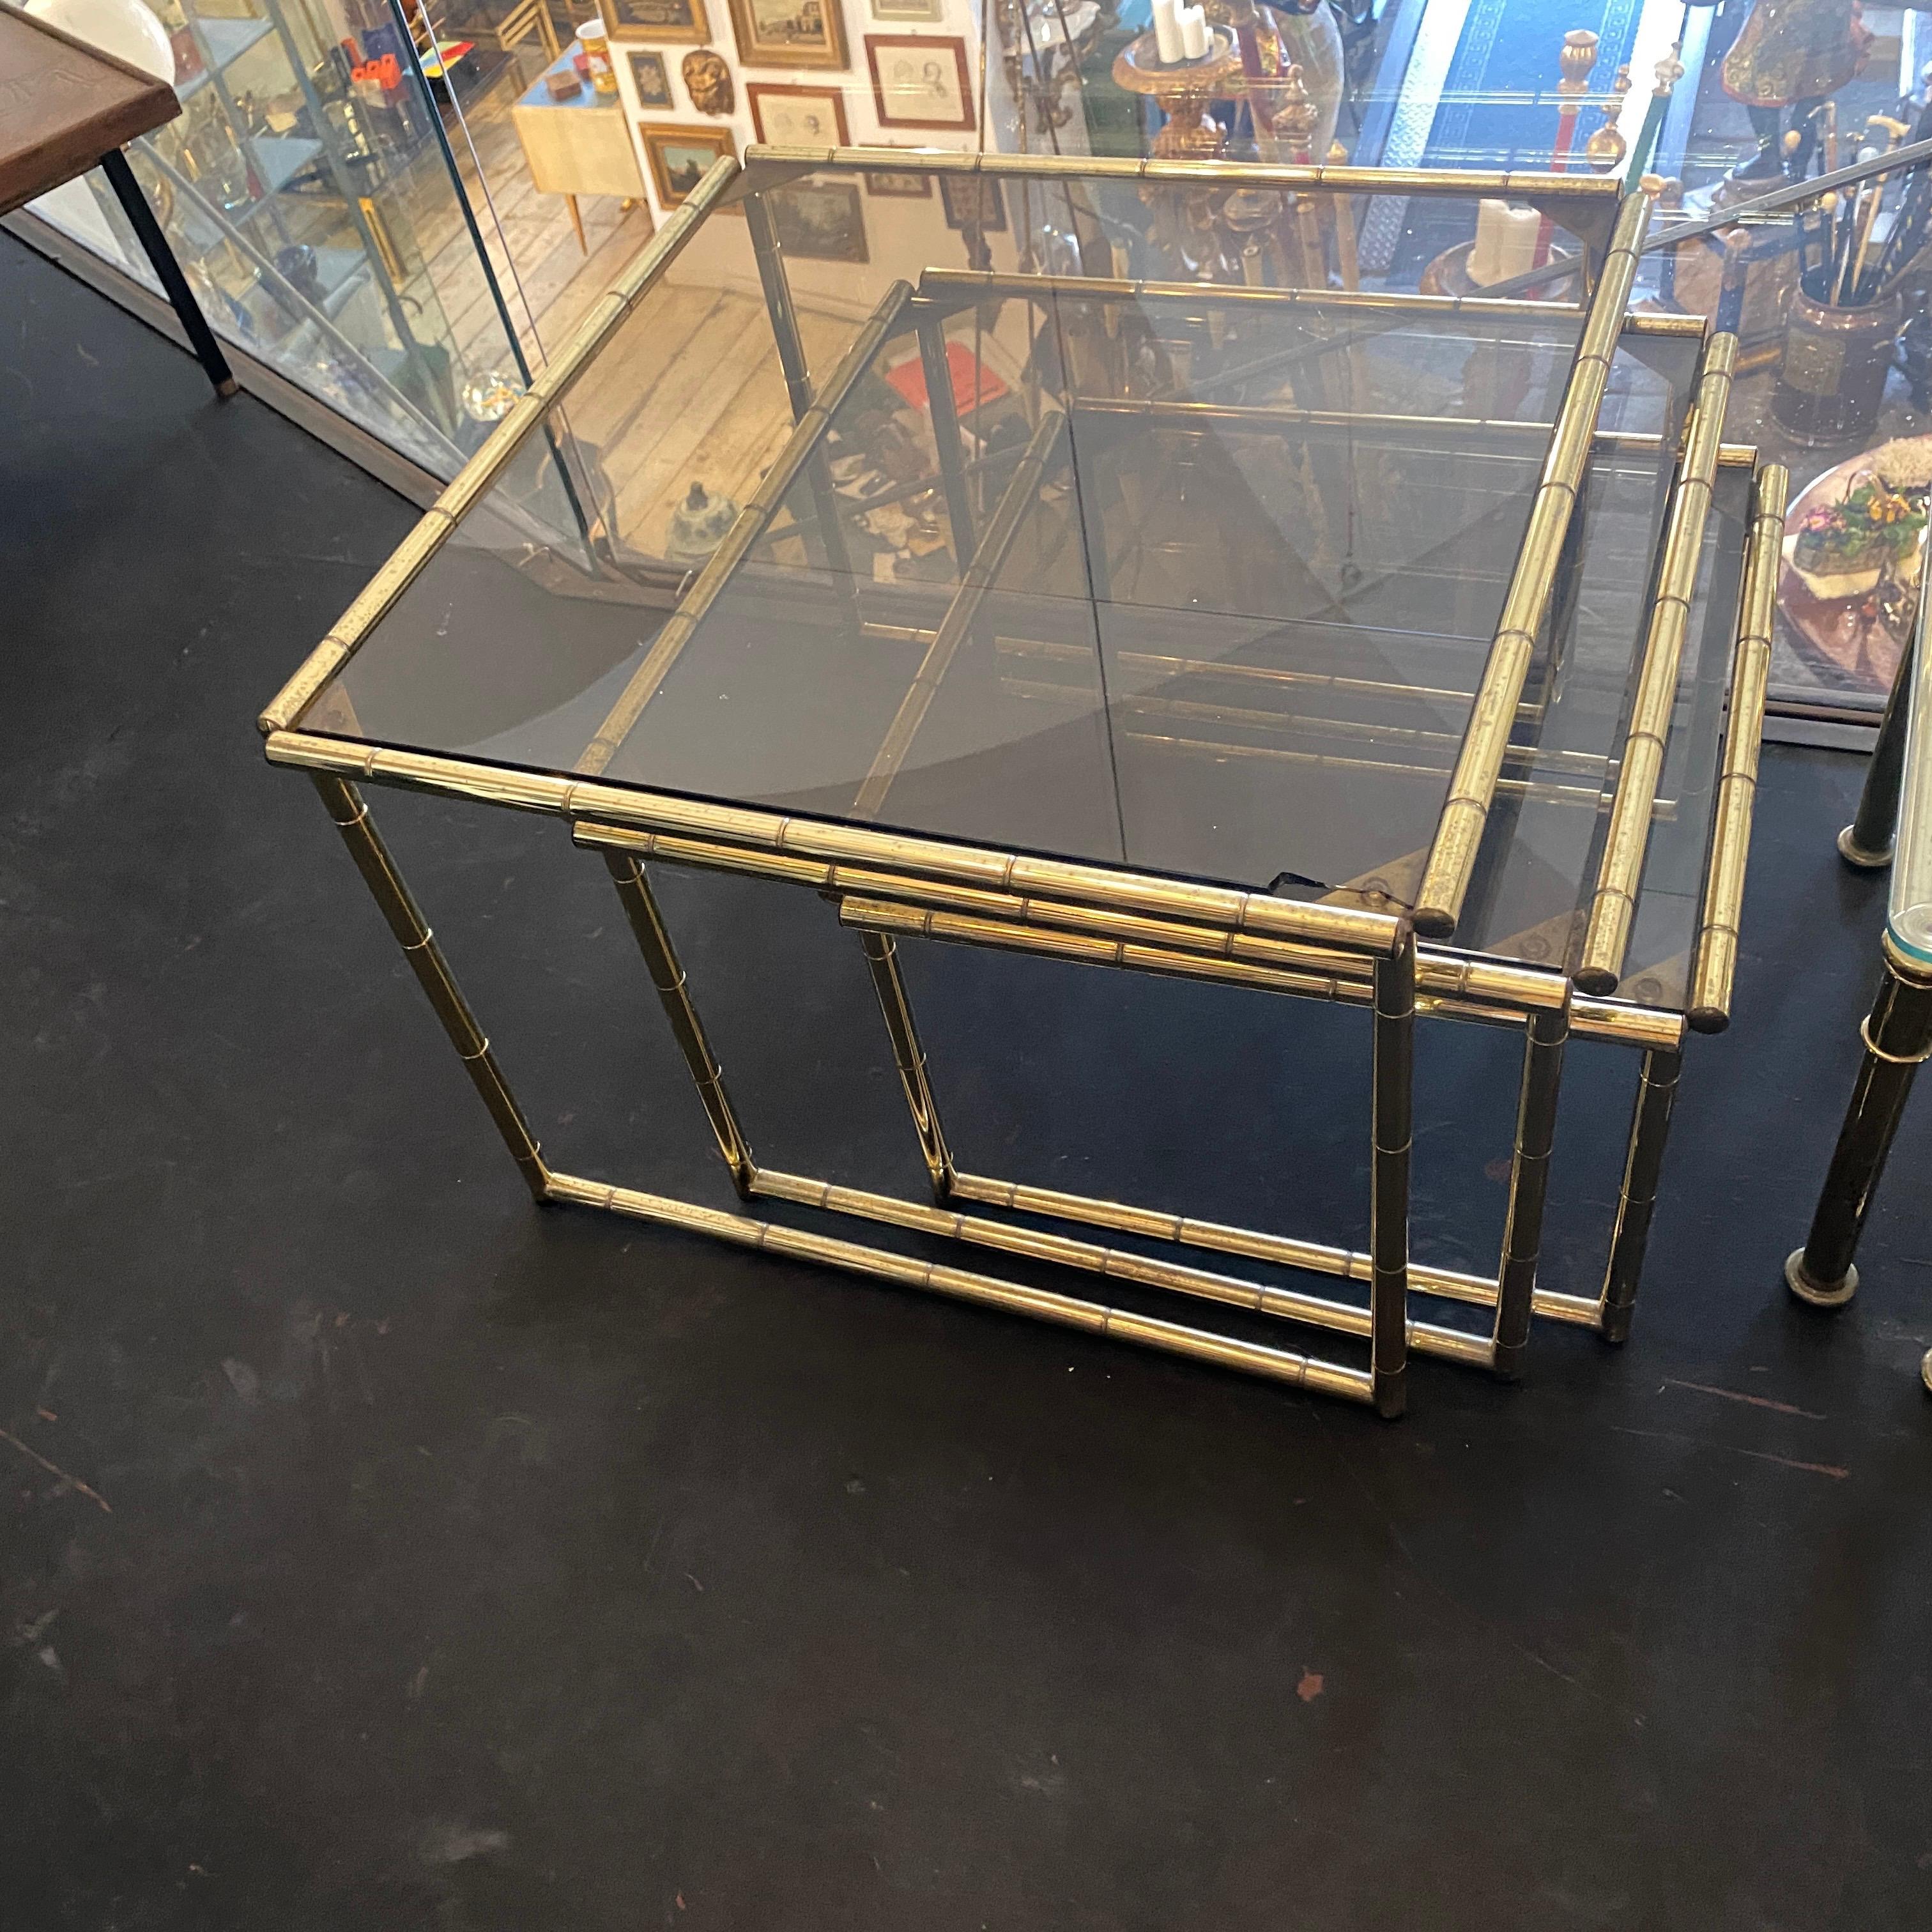 Three brass and smoked glass nesting tables designed and manufactured in Italy in the Sixties in the manner of Tommaso Barbi. Brass it's in original patina, glasses have signs of use and age visibles in the photos. Italian design during the mid-20th